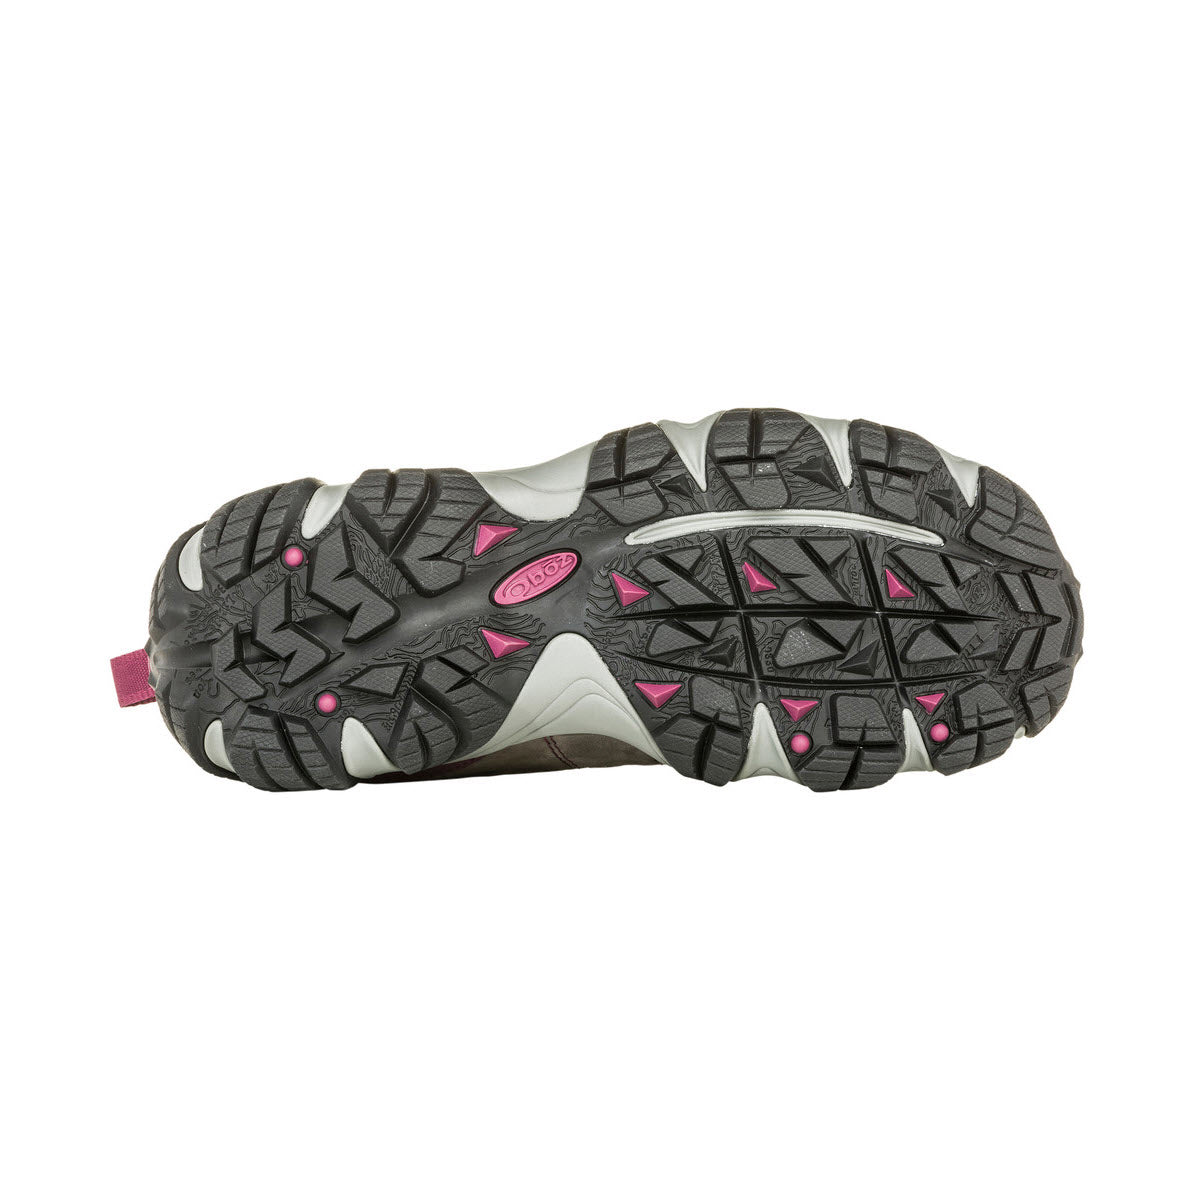 Sole of the Oboz Firebrand II Low B Dry Lilac - Womens hiking shoe with pink accents and a rugged tread pattern, featuring a visible Oboz logo and a waterproof membrane.